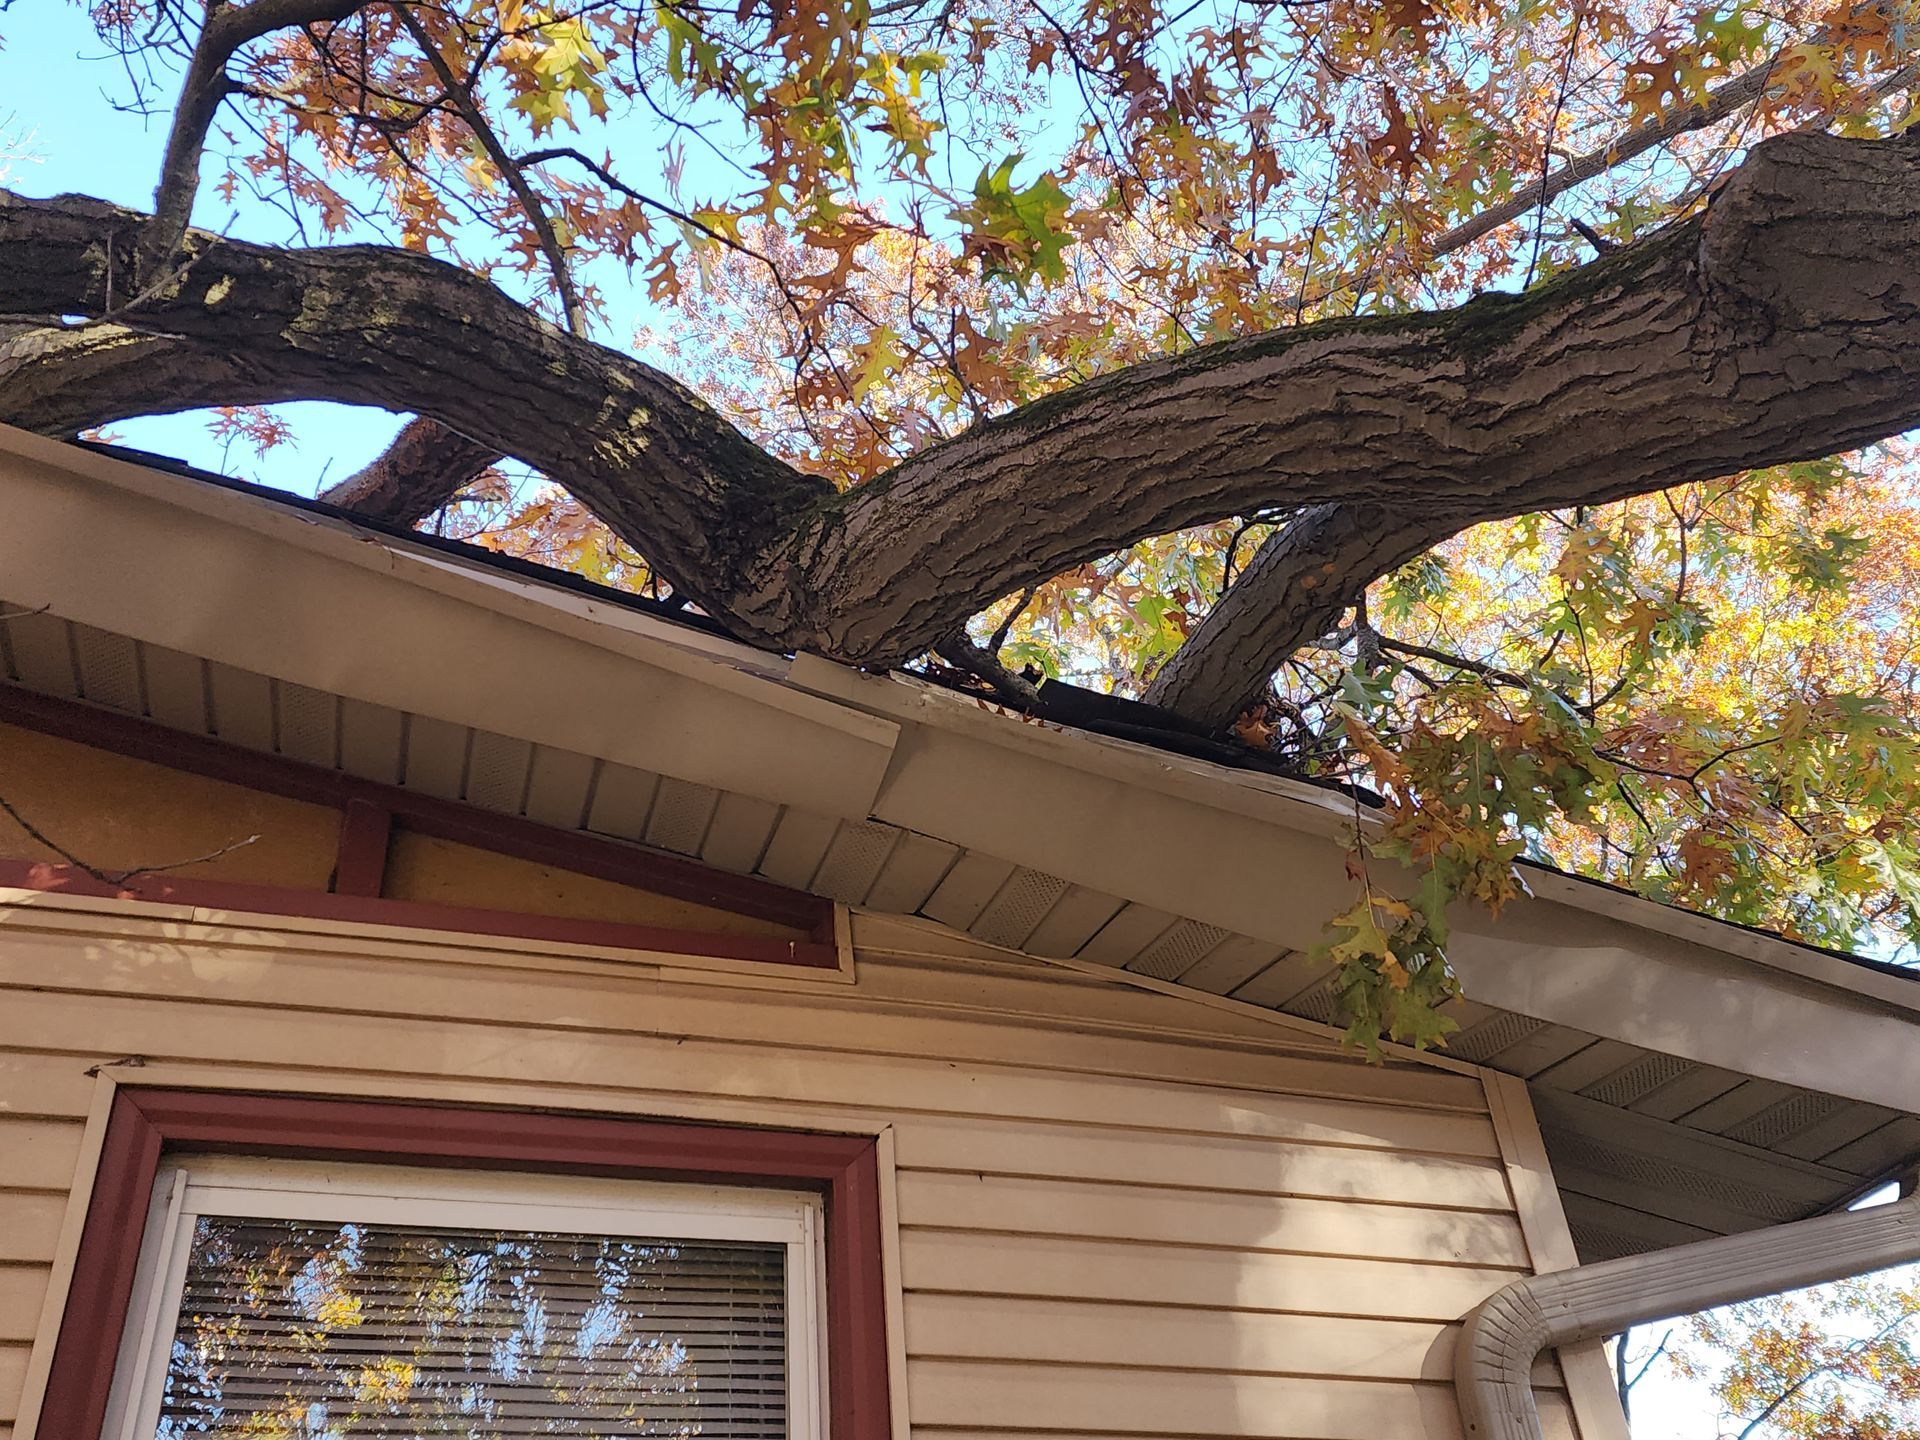 Emergency Tree Removall in Valparaiso, IN